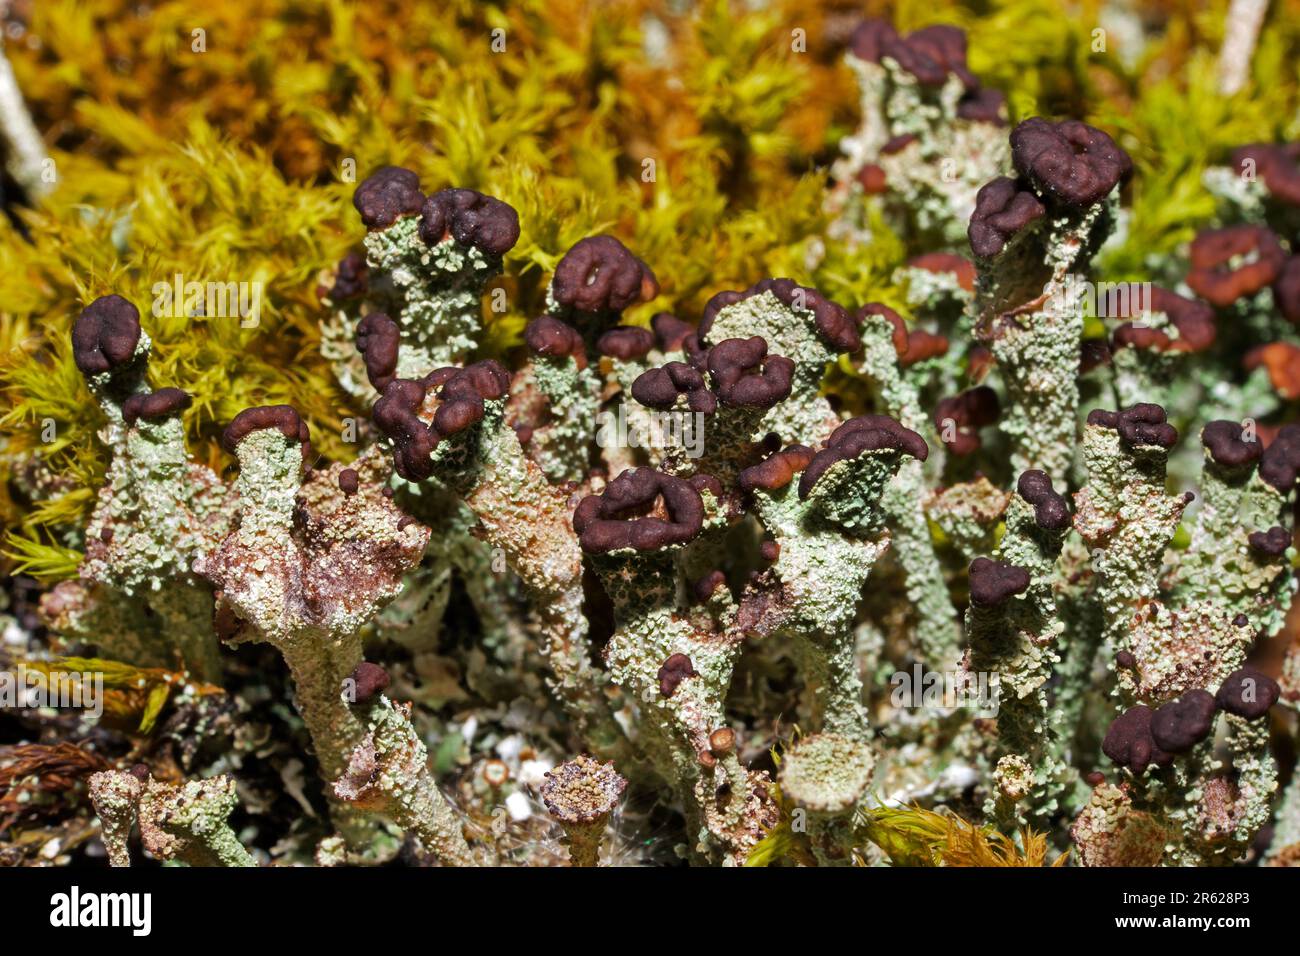 Cladonia ramulosa is a squamulose lichen found on acidic soils and rotting tree stumps. It has a global distribution. Stock Photo